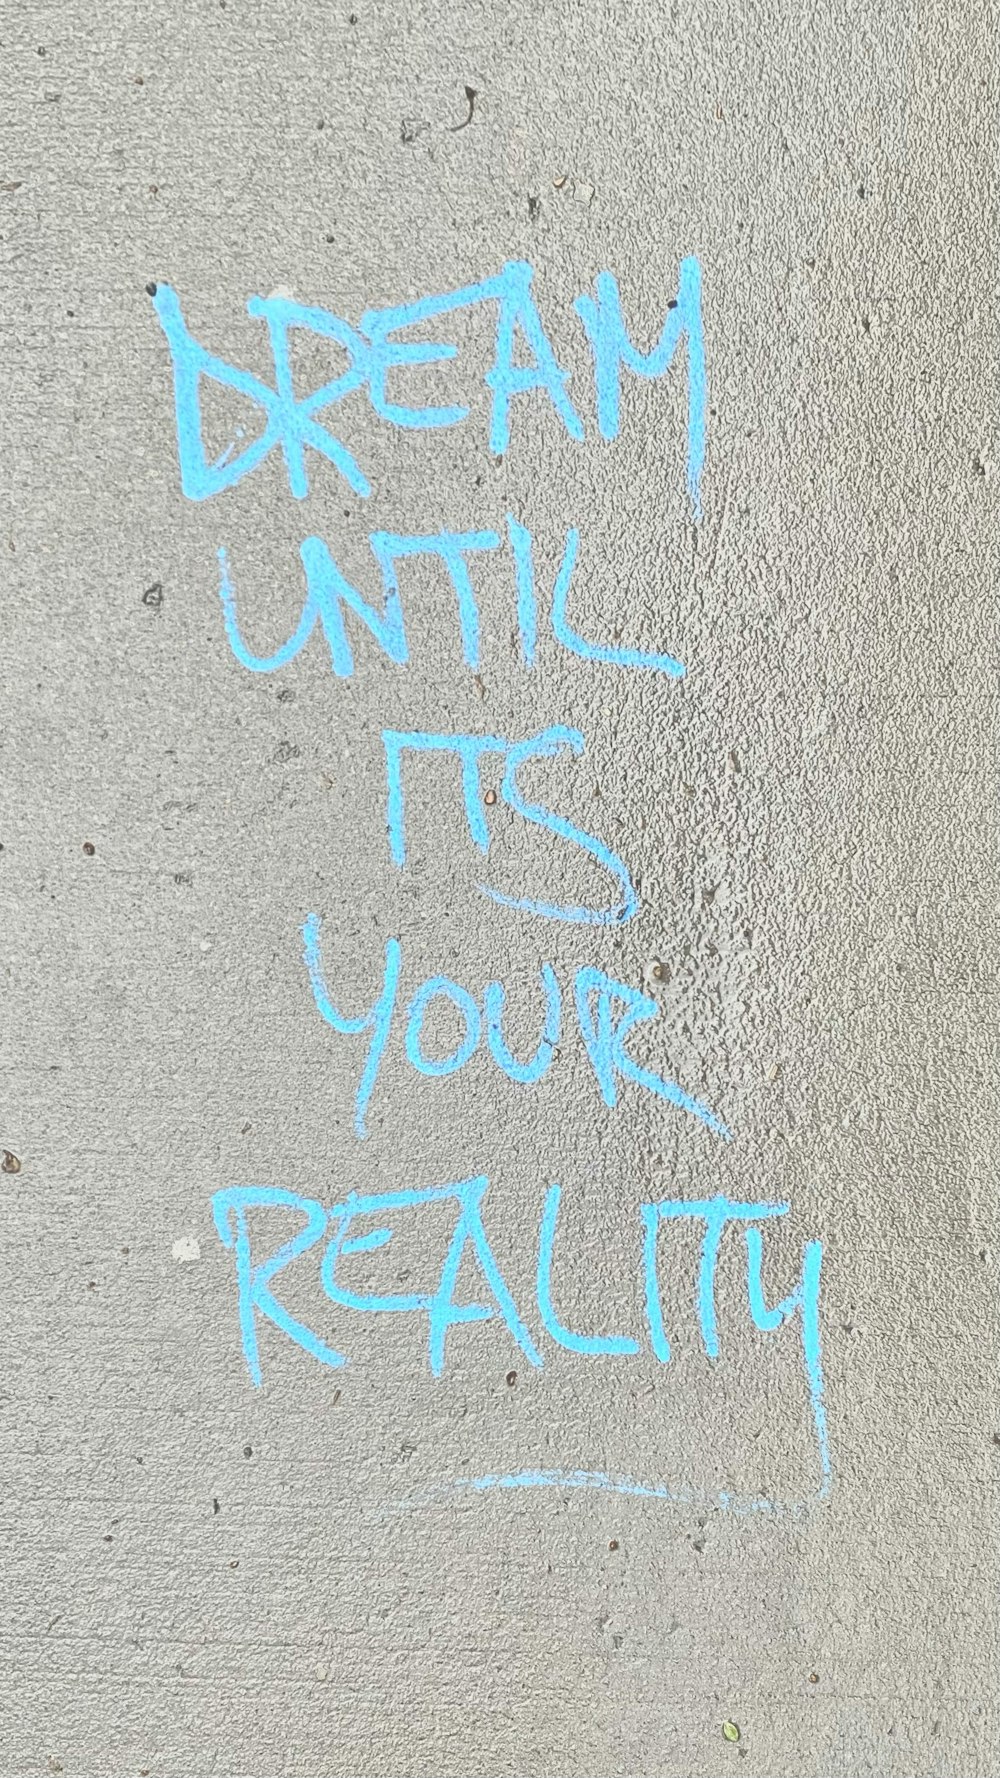 graffiti written on the side of a building says dream until it's your reality